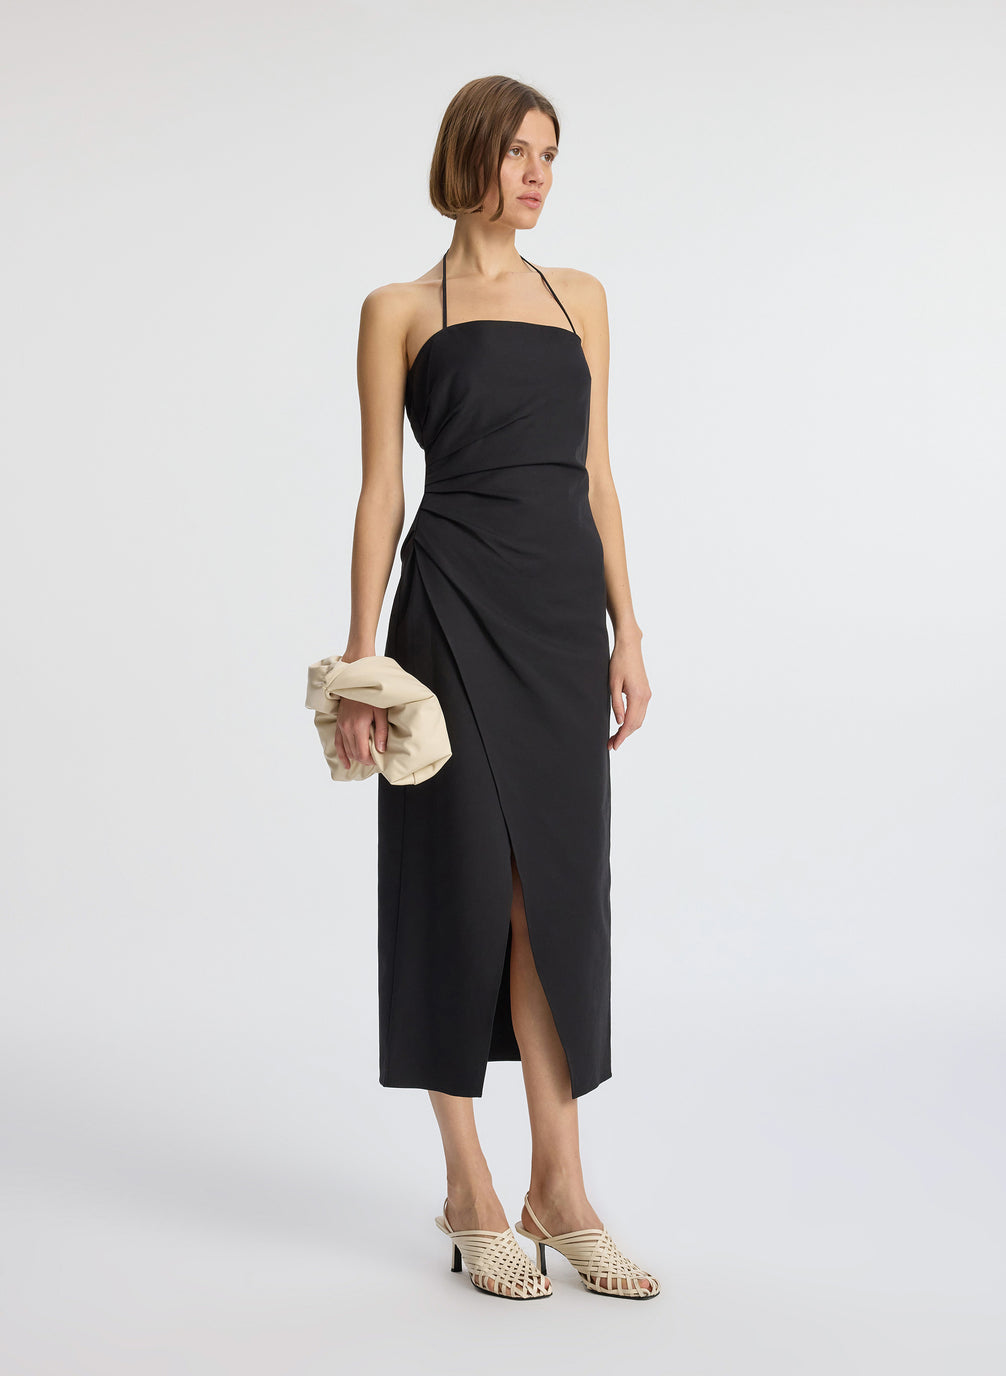 side view of woman wearing black halter neckline ruched midi dress